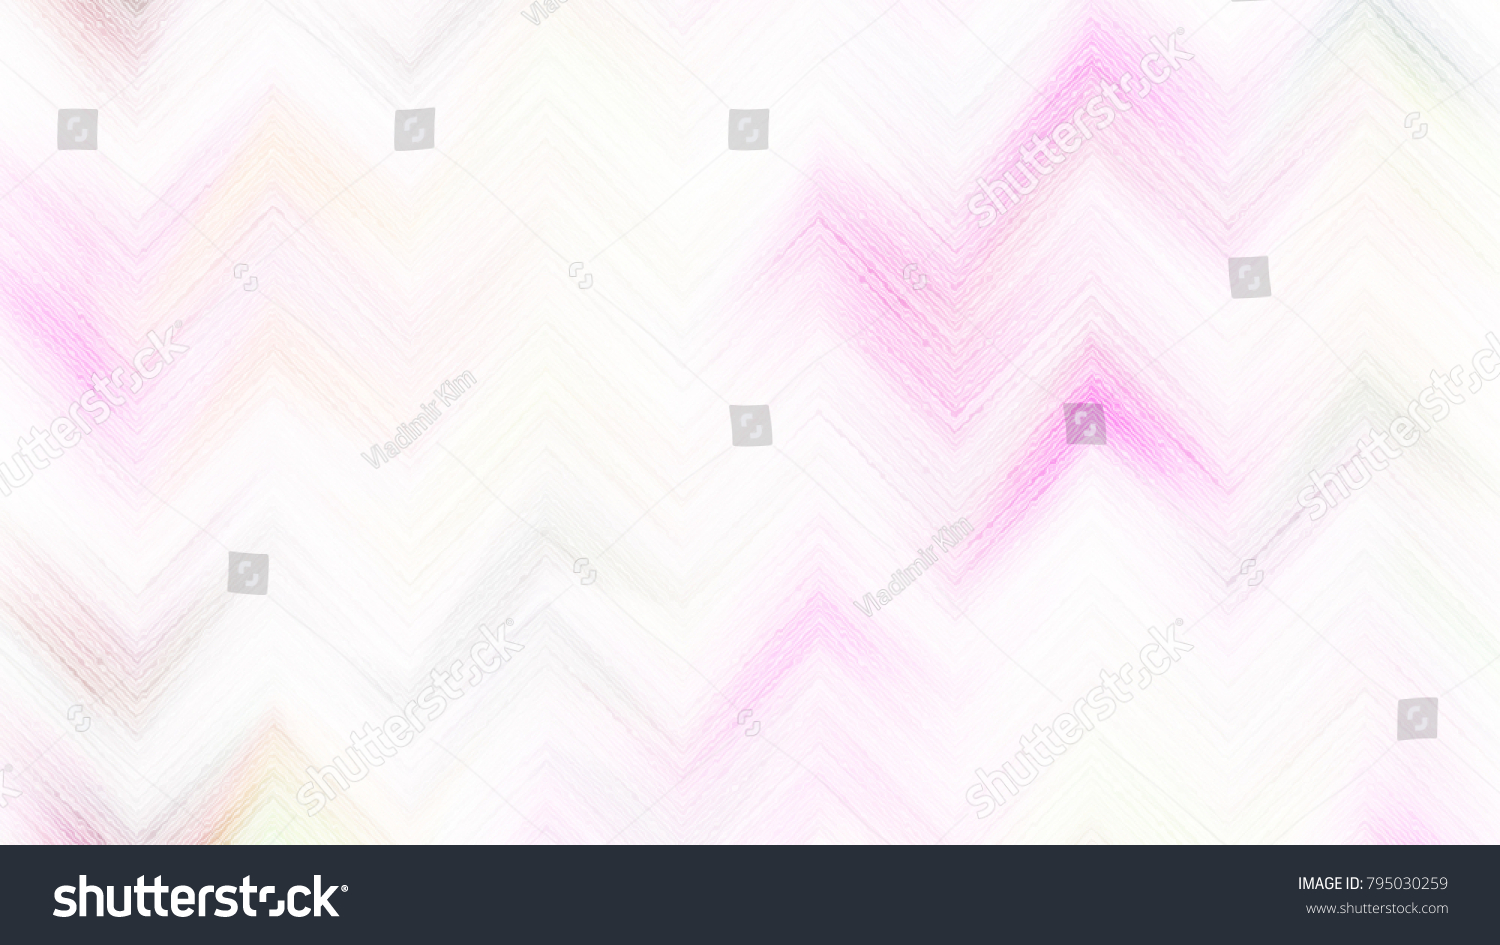 Colorful zigzag striped pattern for background and design #795030259